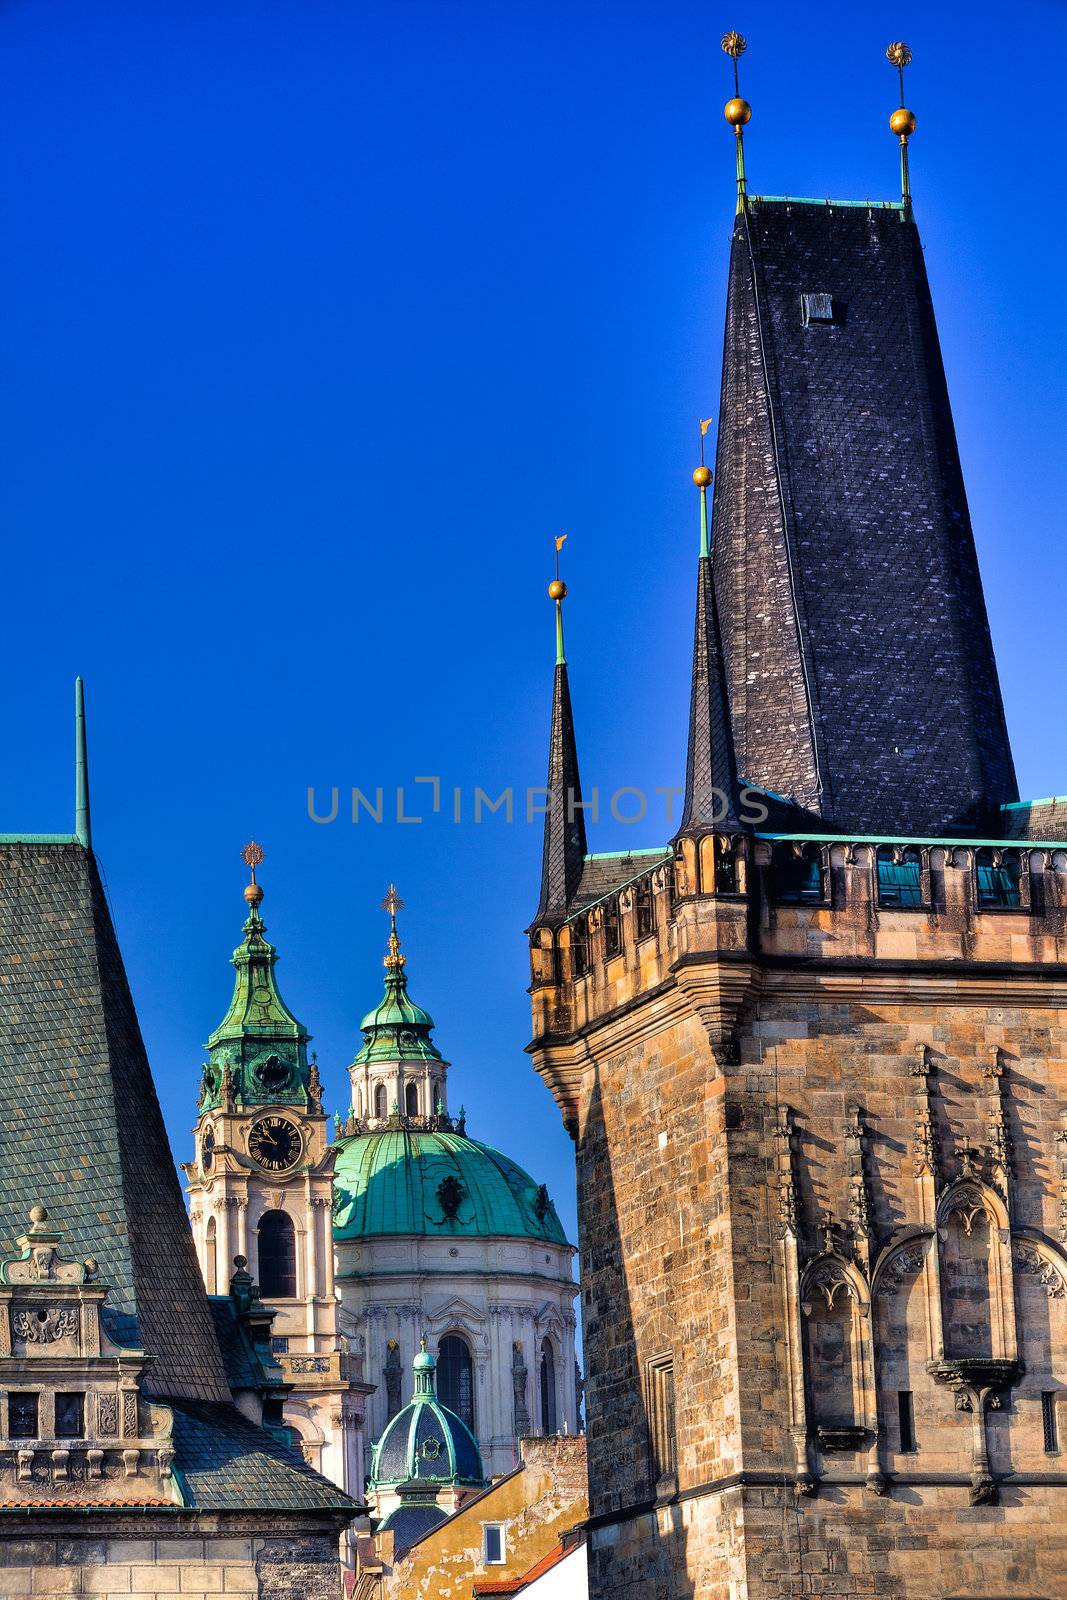 Famous church at one end of Charles bridge on the river in Prague.